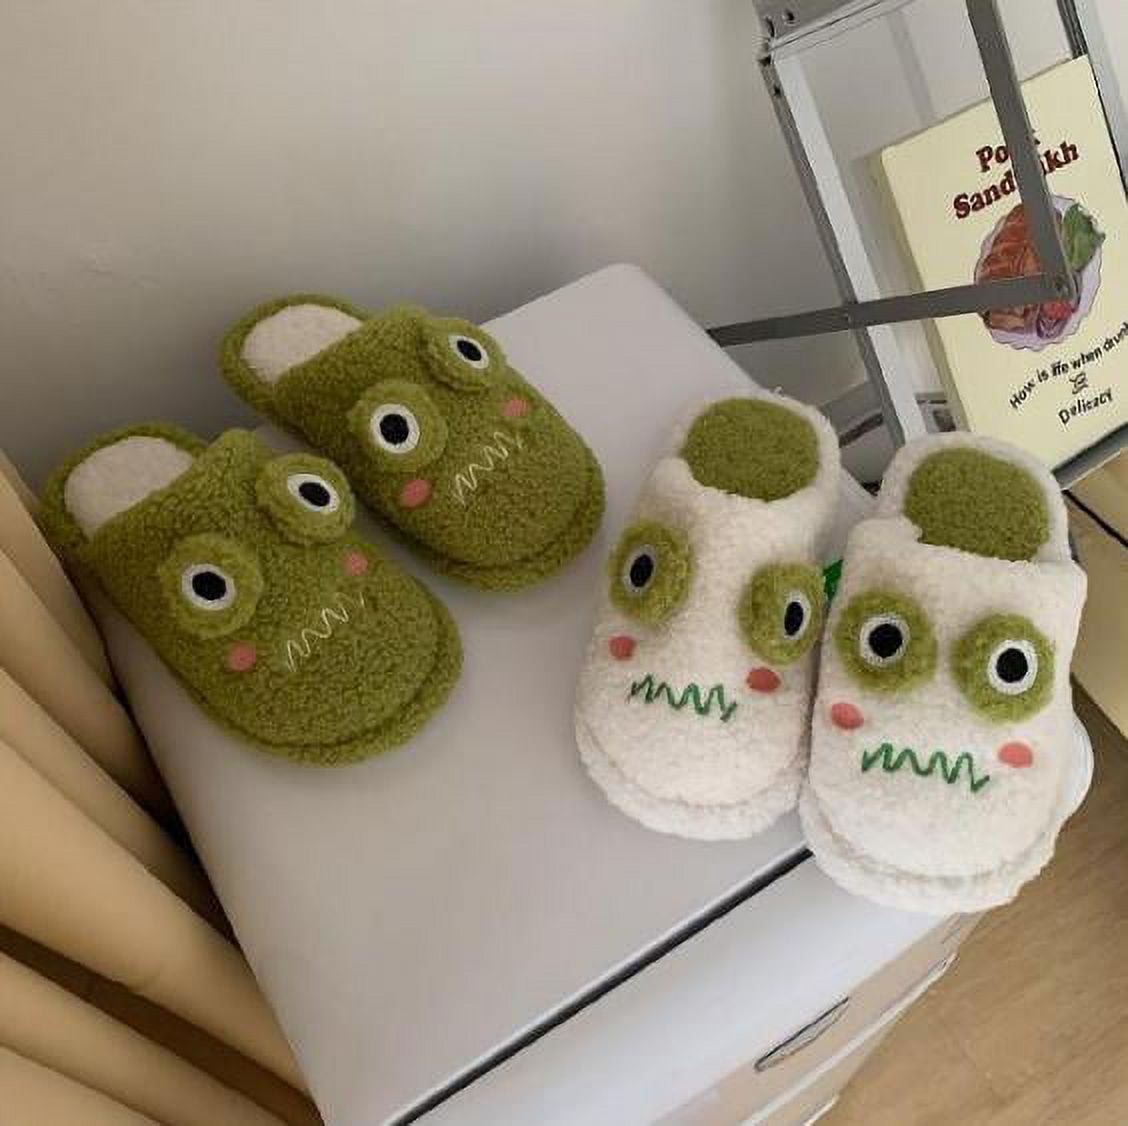 These adorable slippers will make mopping your floors super fun